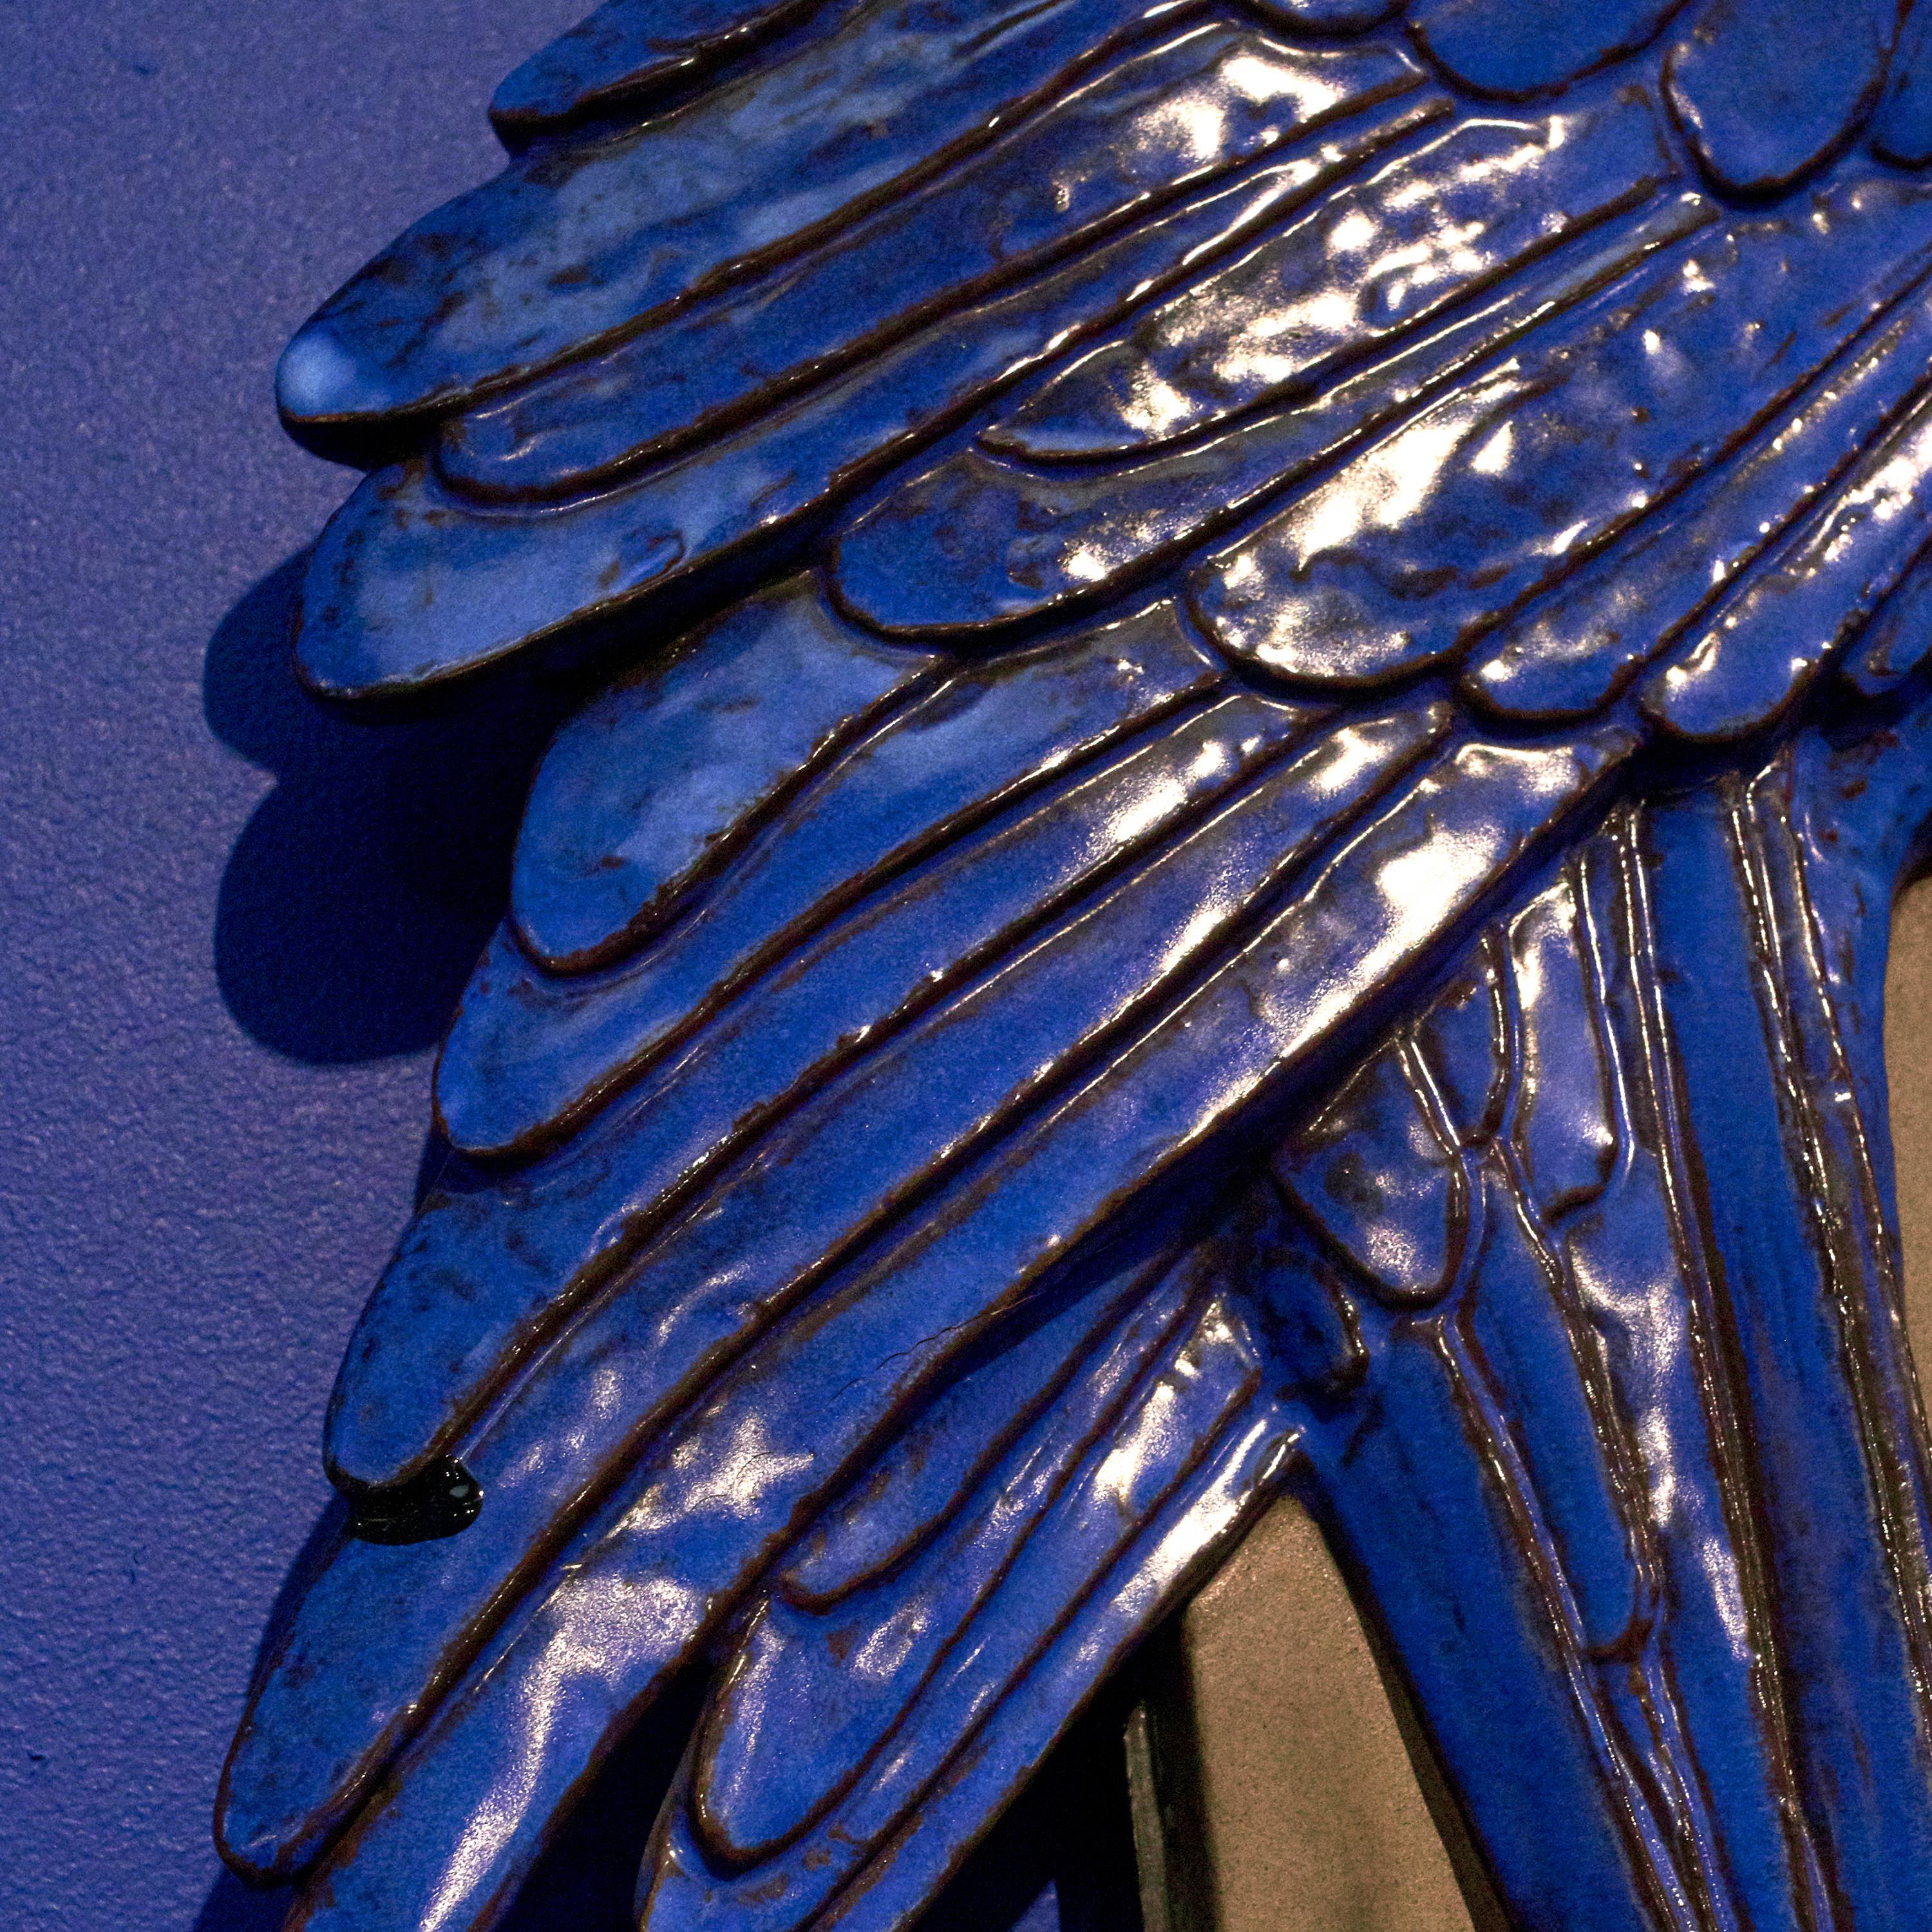 Jeanne Grut 1927-2009.
A faience wall relief in the shape of a hyacintara parrot.
Blue glazed faience, branch and background unglazed.
Designed 1961 by Jeanne Grut for Aluminia, Denmark 1961.
Stamped.
 
Aluminia was a Danish factory of faience